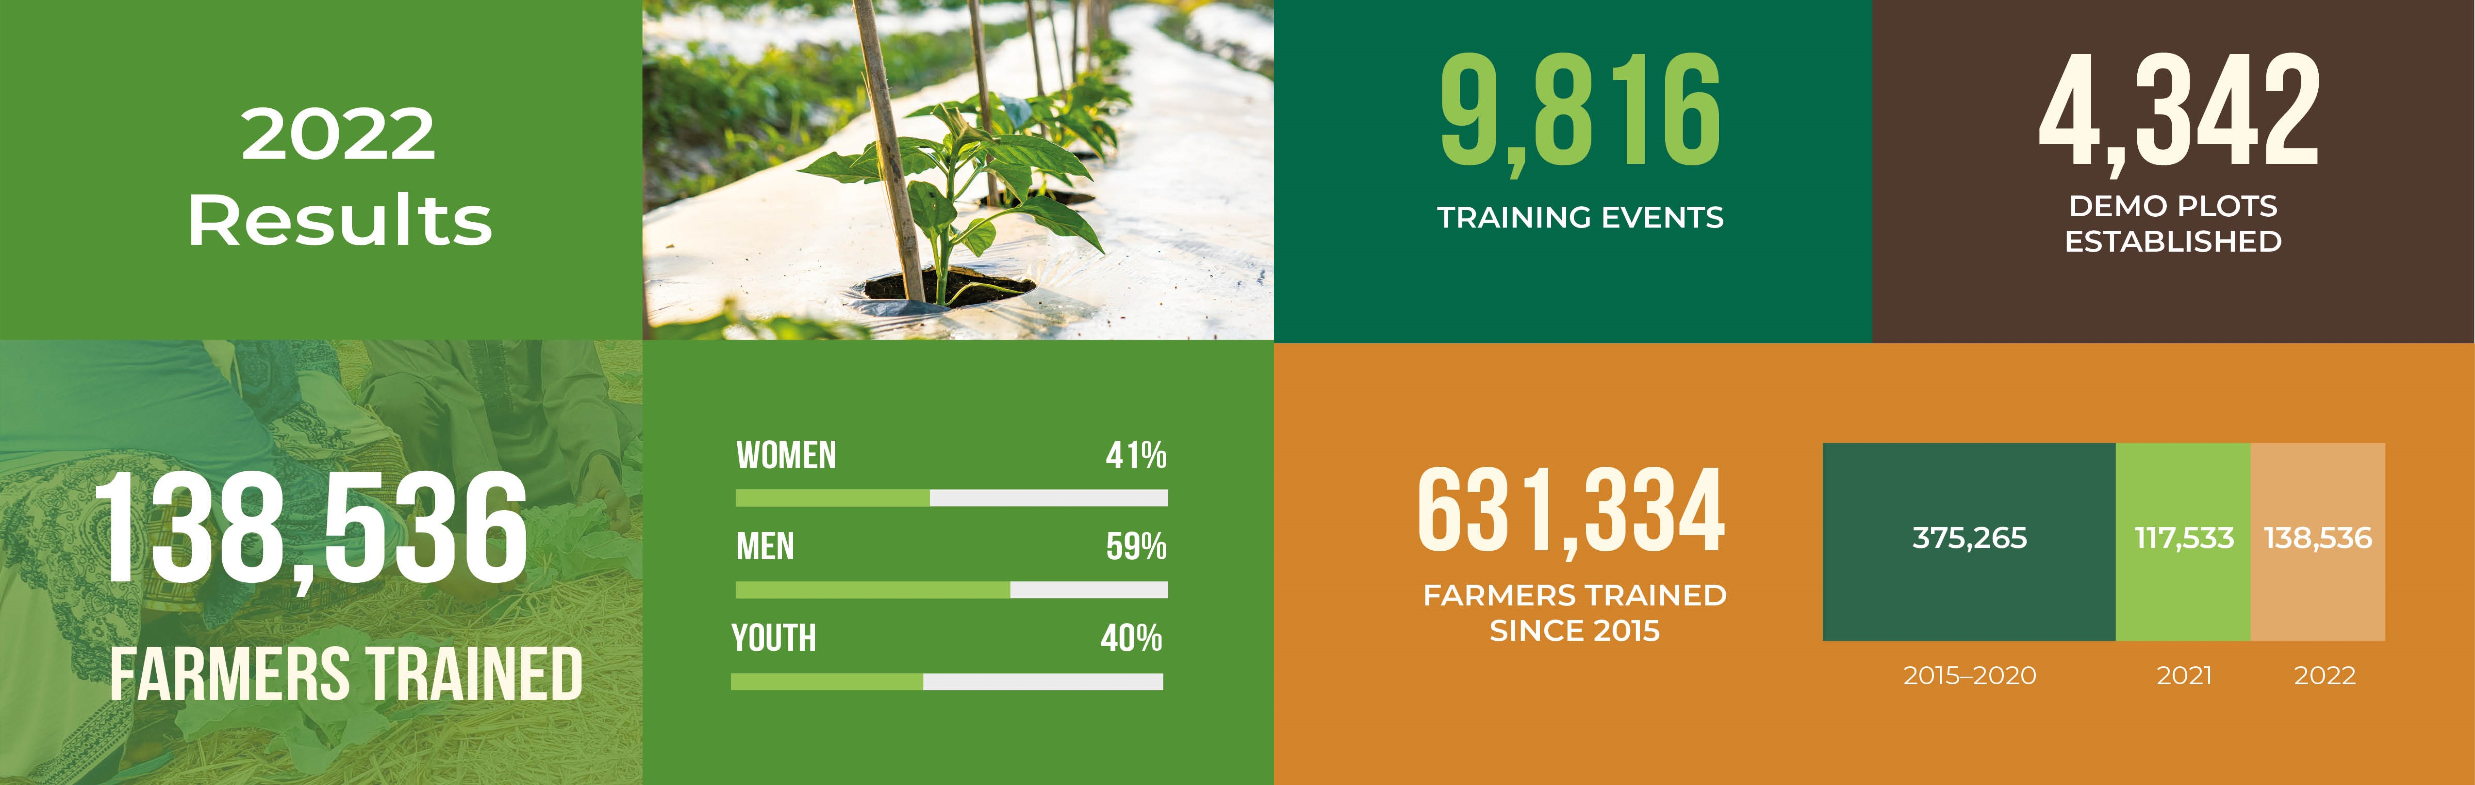 Graphic showing 2022 results: 138,536 farmers trained (41% women, 59% men, and 40% youth); 9,816 training events; 4,342 demonstration plots established; 631,334 farmers trained since 2015